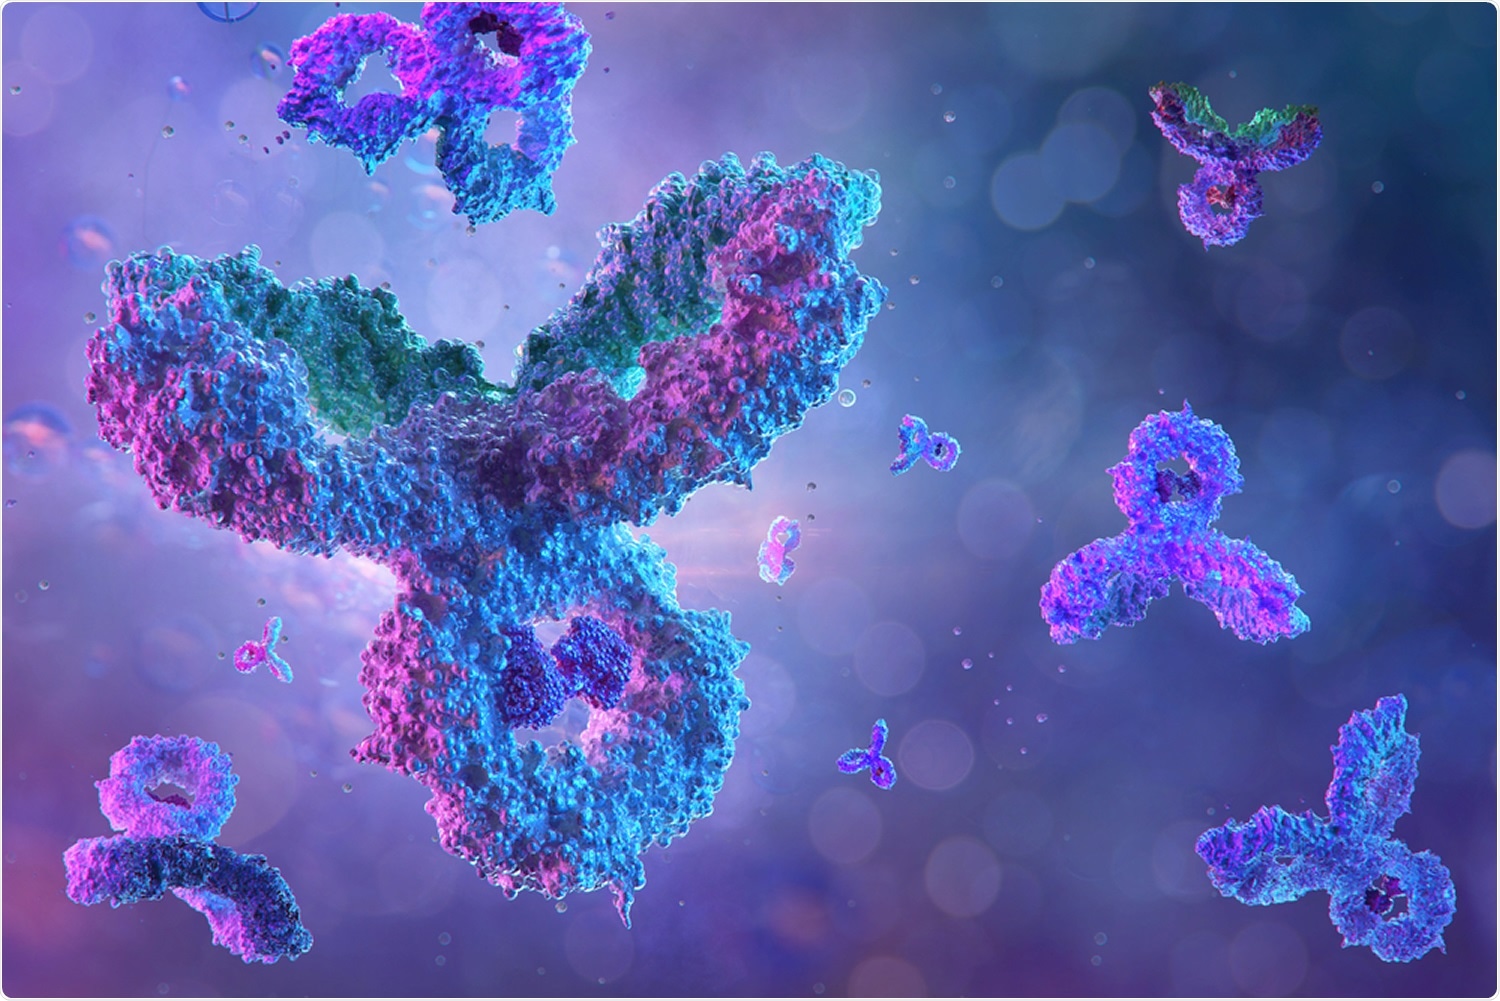 Study: REGEN-COV Antibody Cocktail in Outpatients with Covid-19. Image Credit: Corona Borealis Studio / Shutterstock